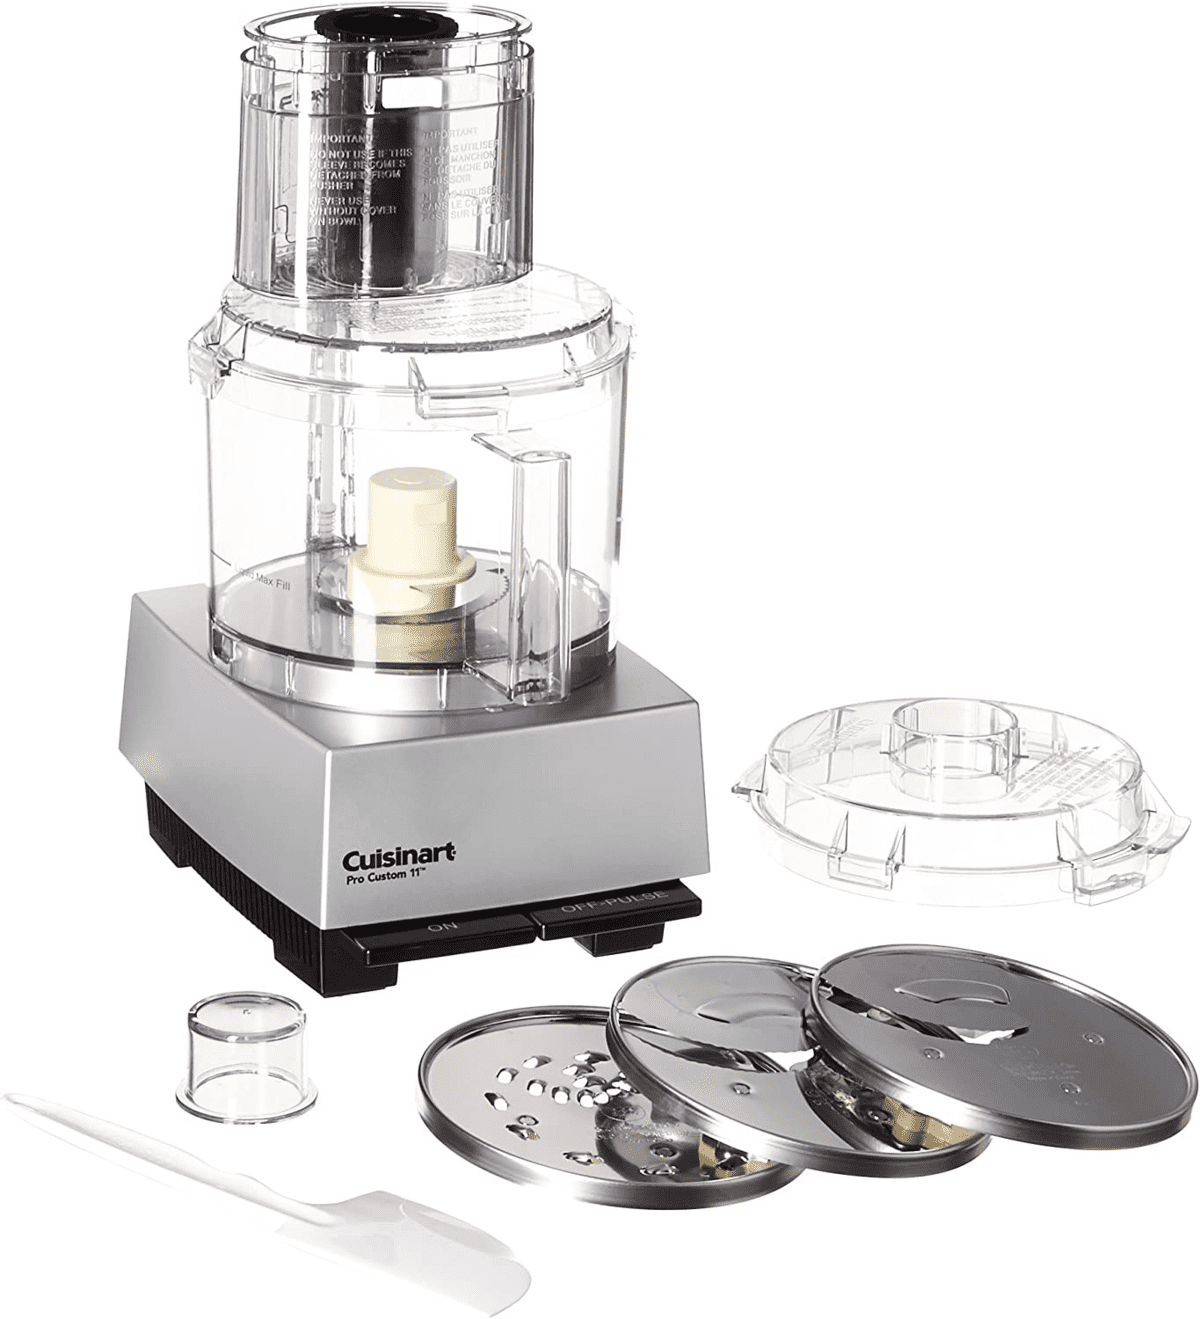 Cuisinart Food Processor with attachments next to it with white backdrop.